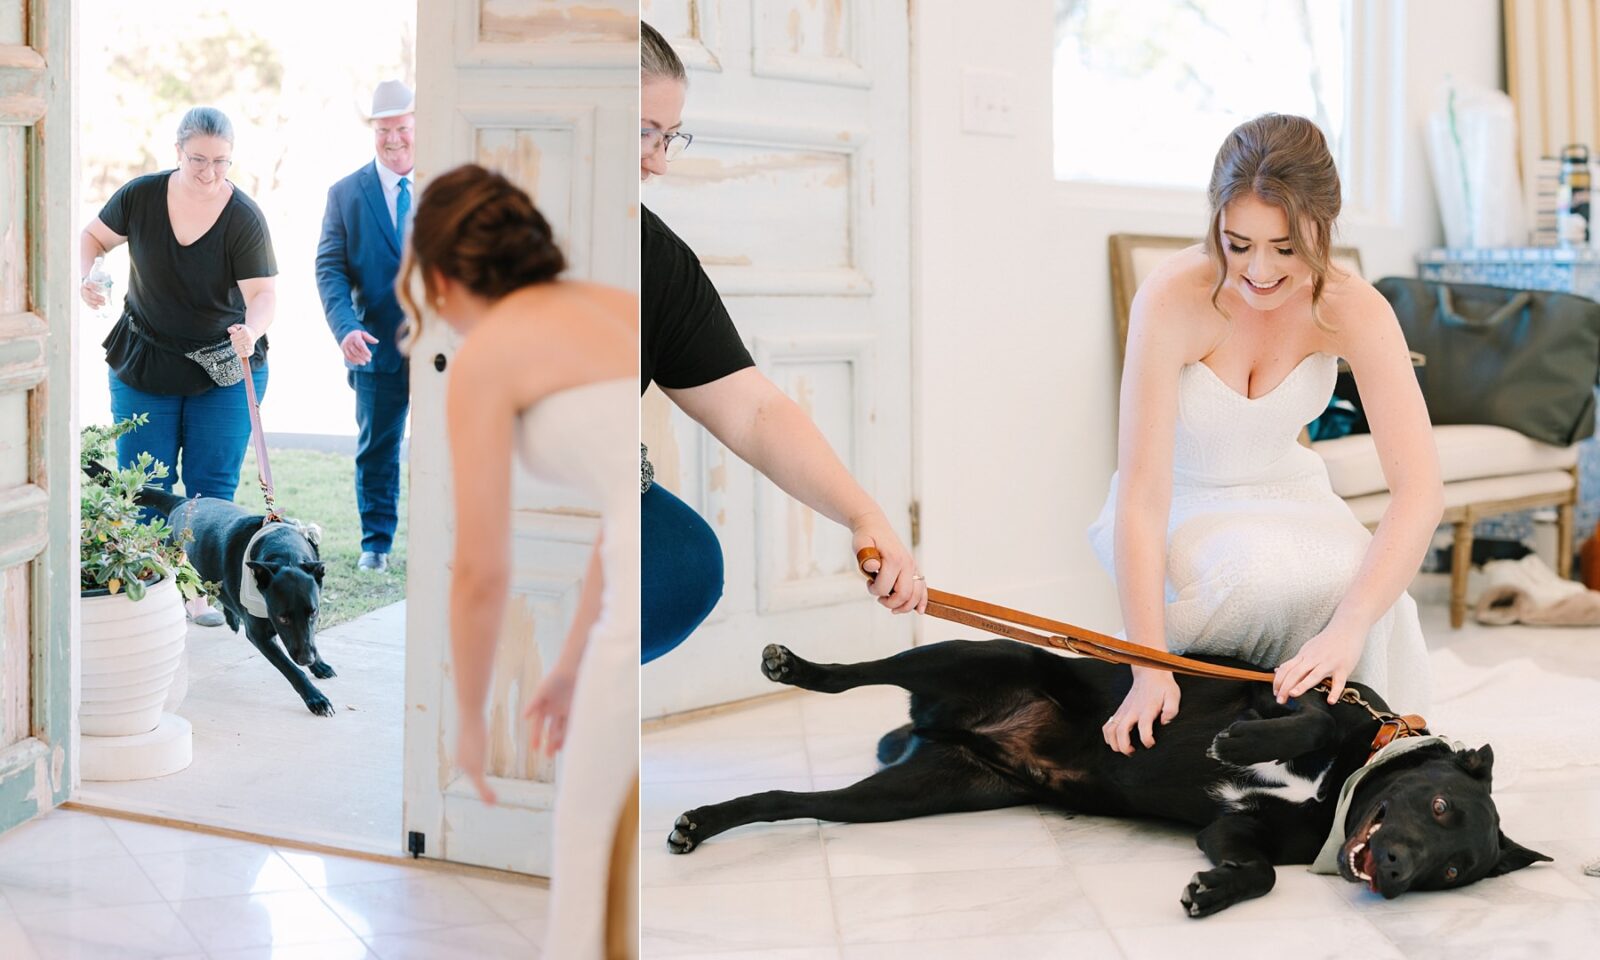 first look with dog at wedding, wedding dog first look, dog ring bearer at wedding, wedding dog flower girl, the pet gal, wedding at the videre estate venue, wimberley, photos by Tara Lyons Photography, Perry's Petal, planning by sweet magnolia events